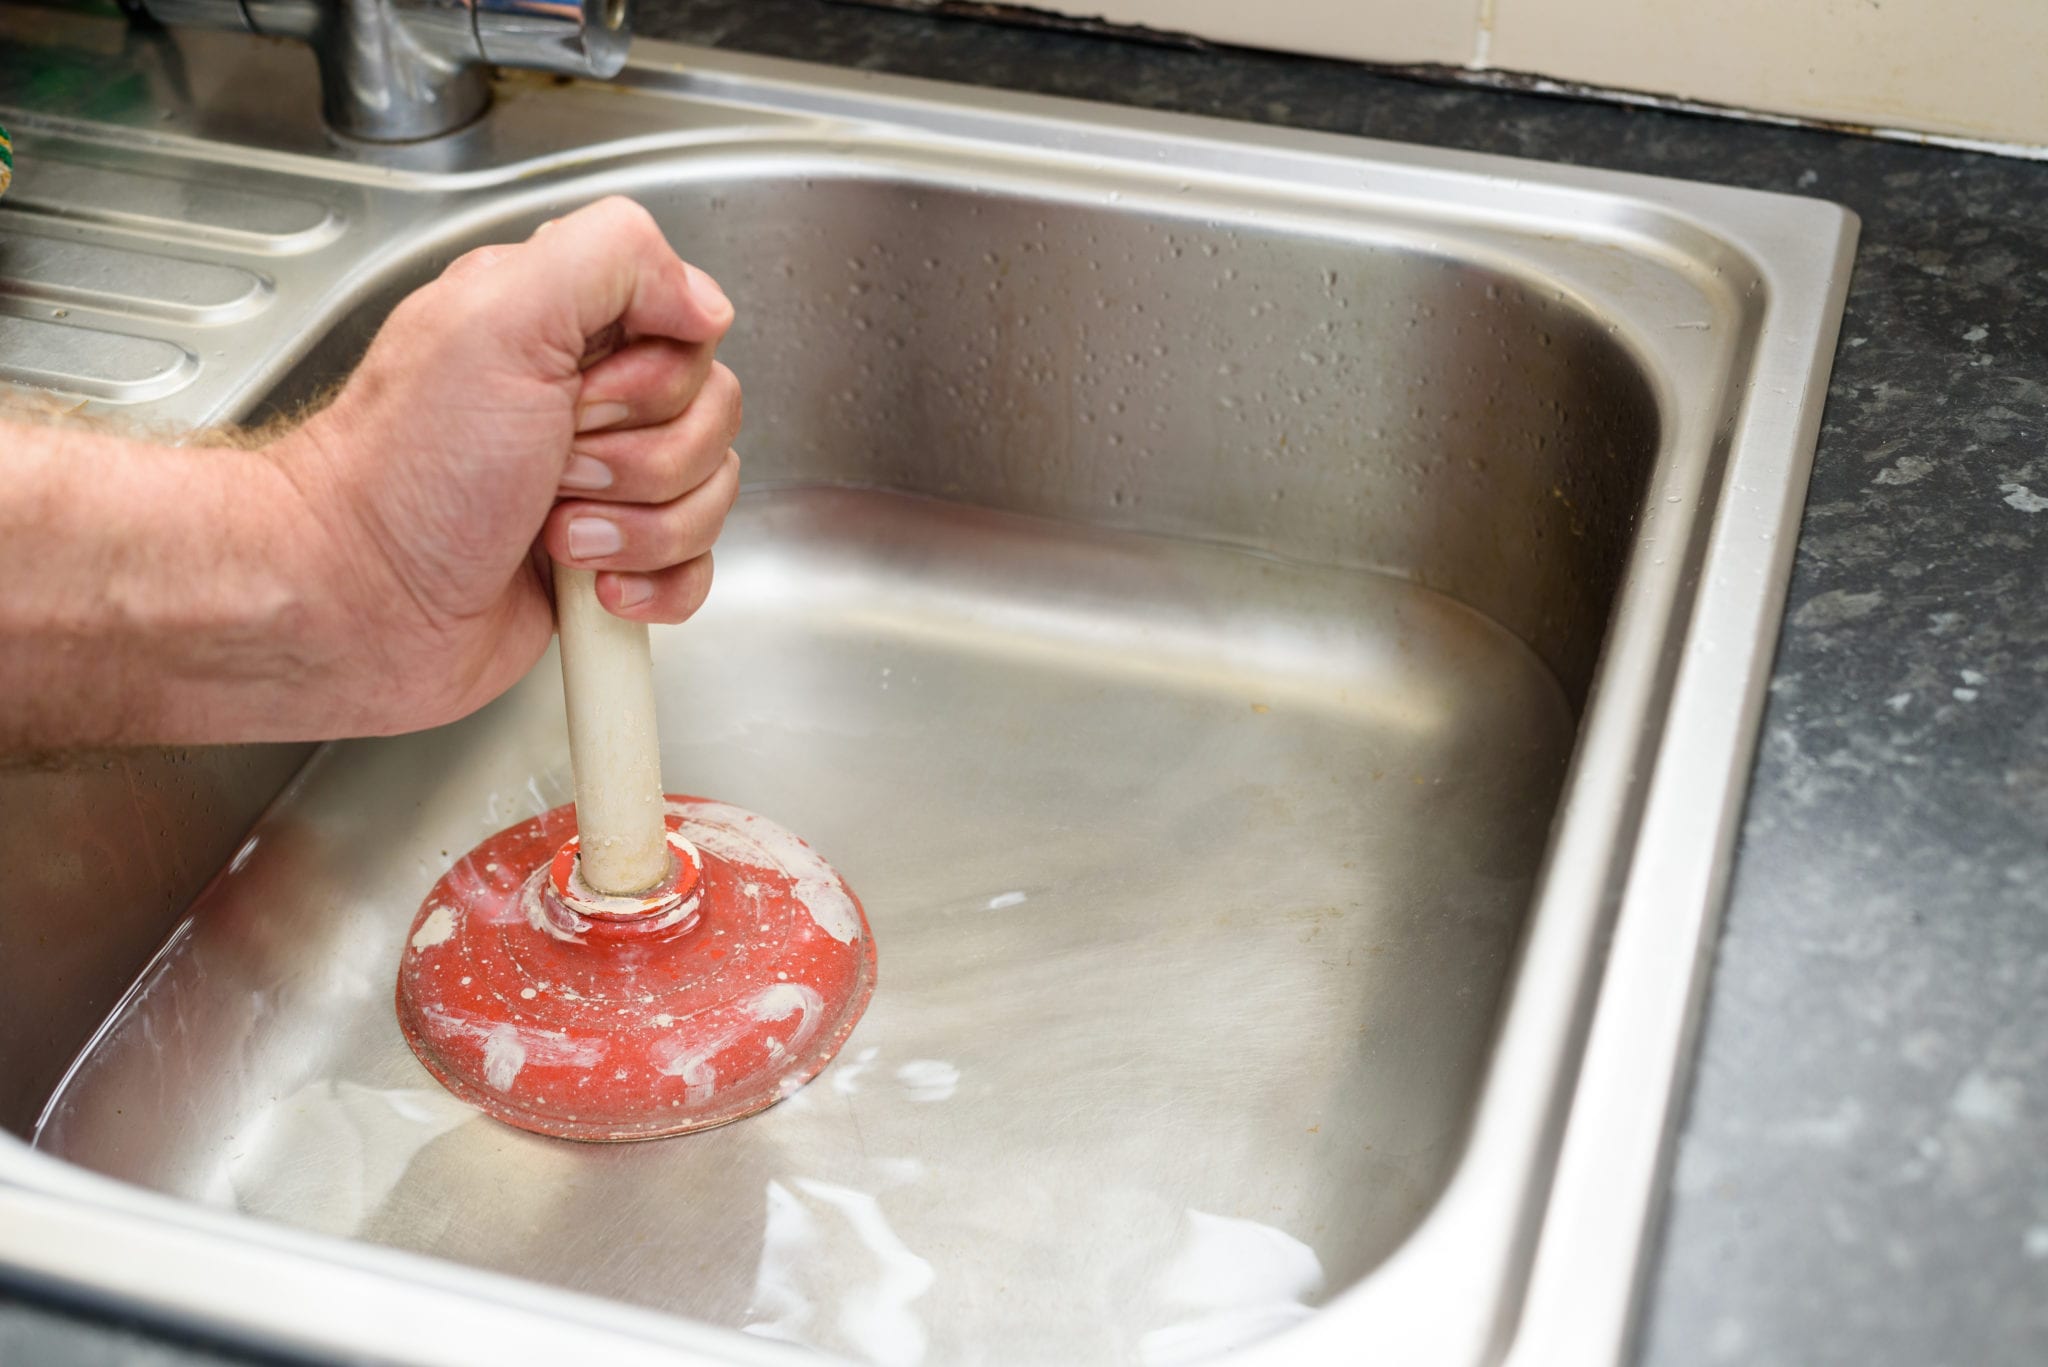 Use a Plunger to Remove Objects From Drain